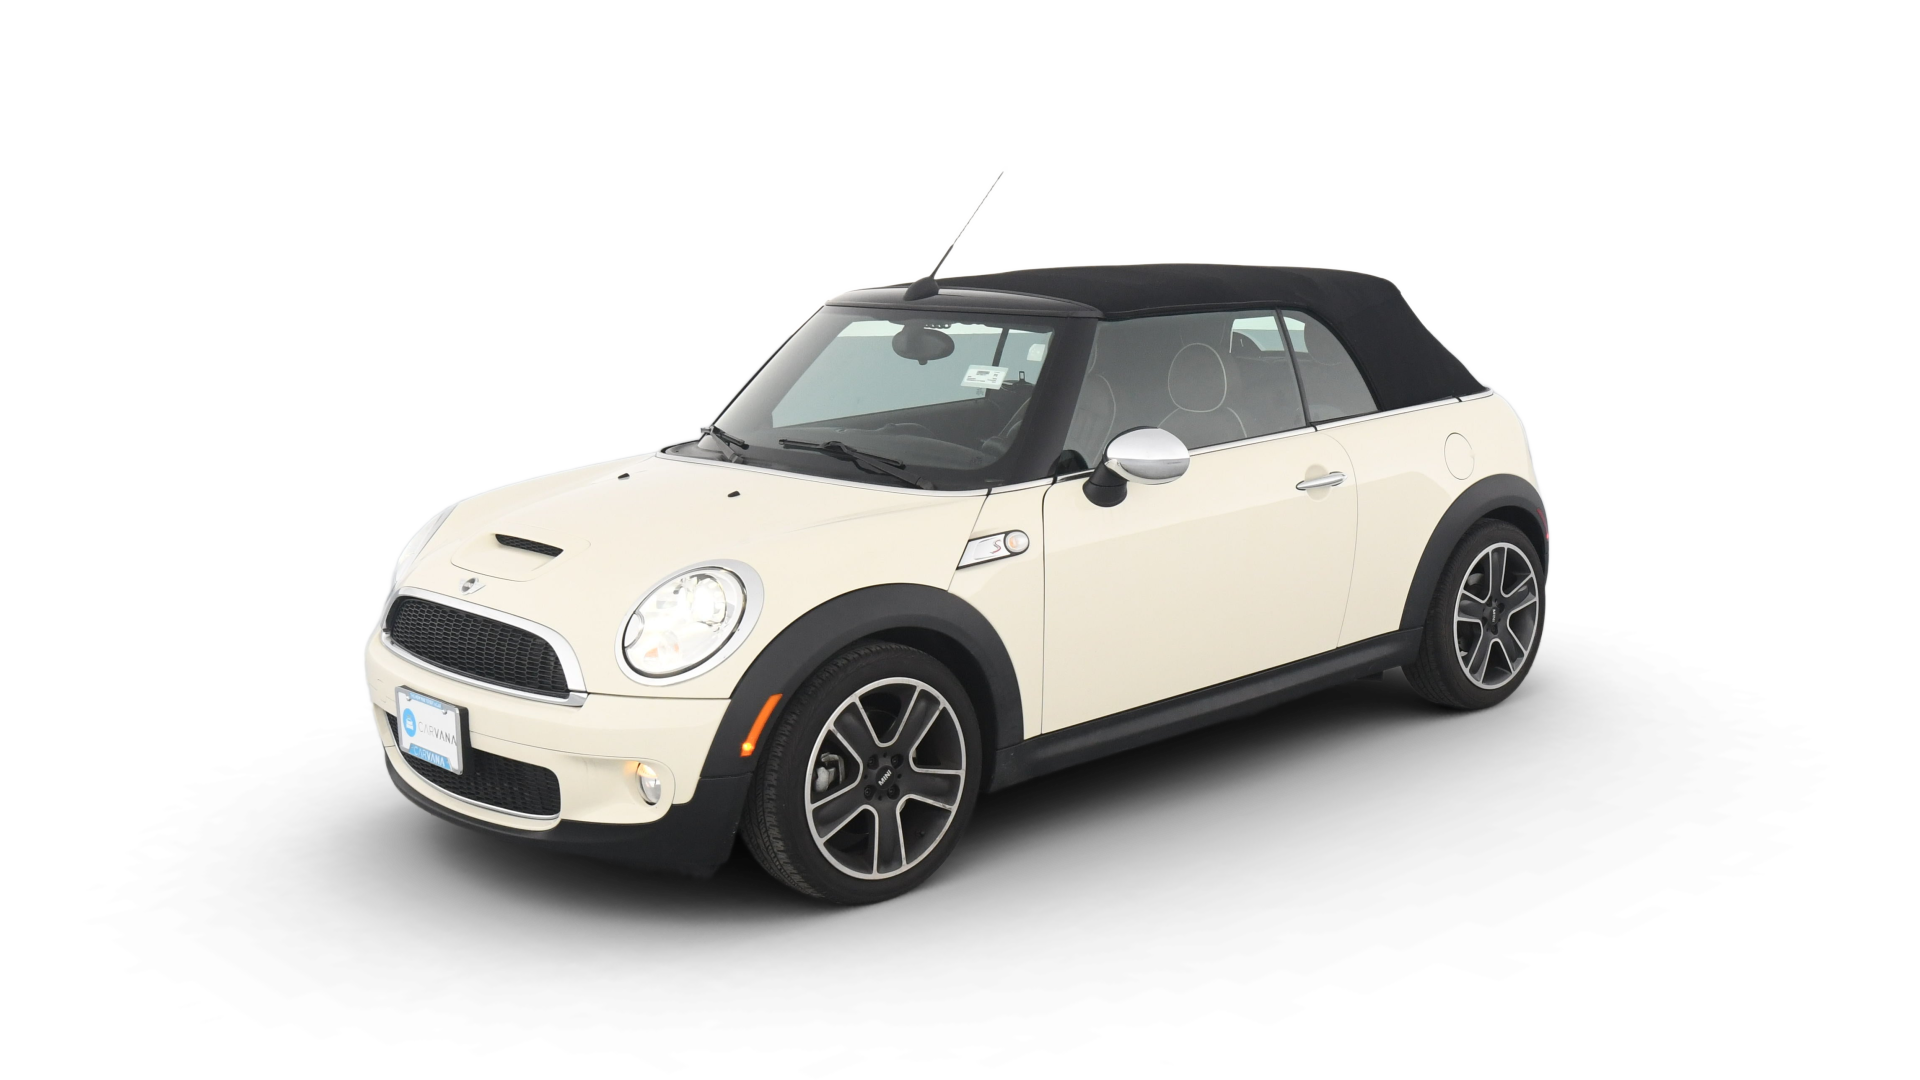 Used MINI Convertible for Sale Online